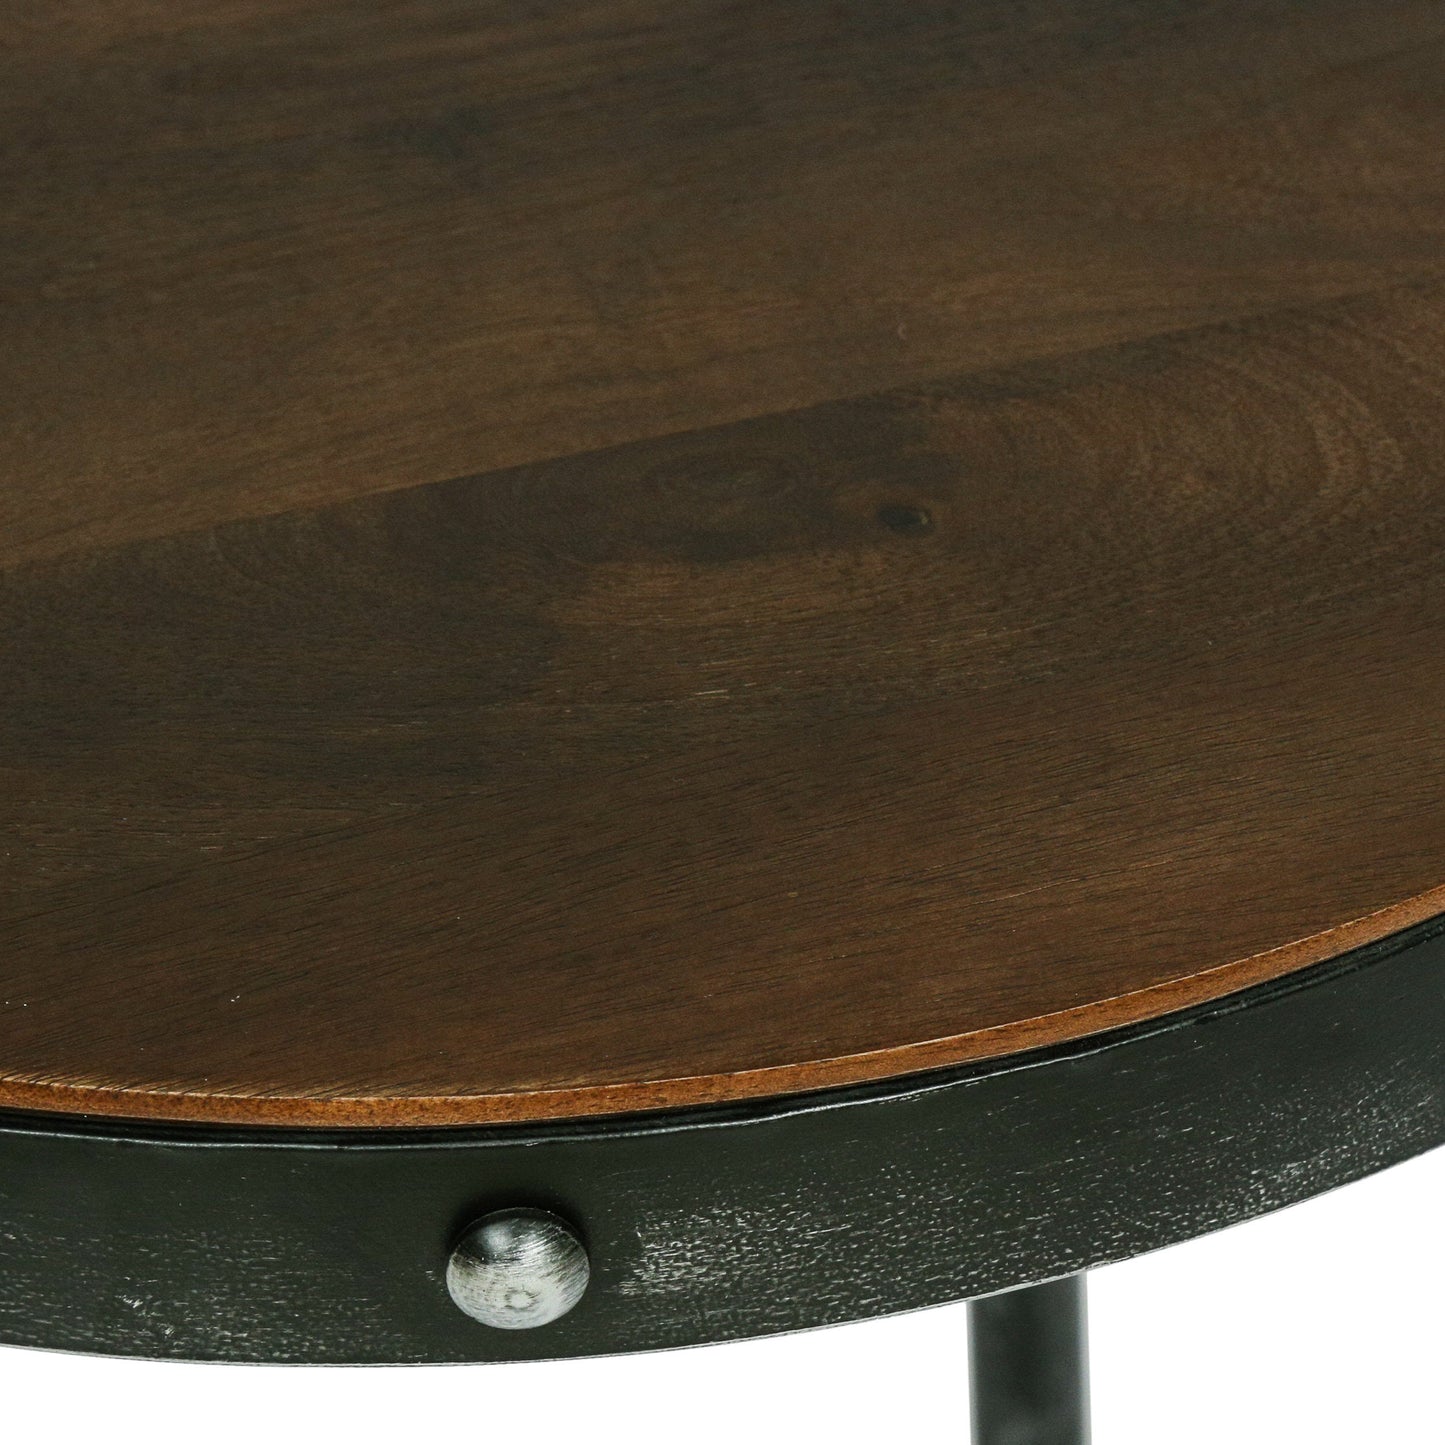 Clopton Modern Industrial Handcrafted Round Mango Wood Side Table, Brown and Antique Gunmetal